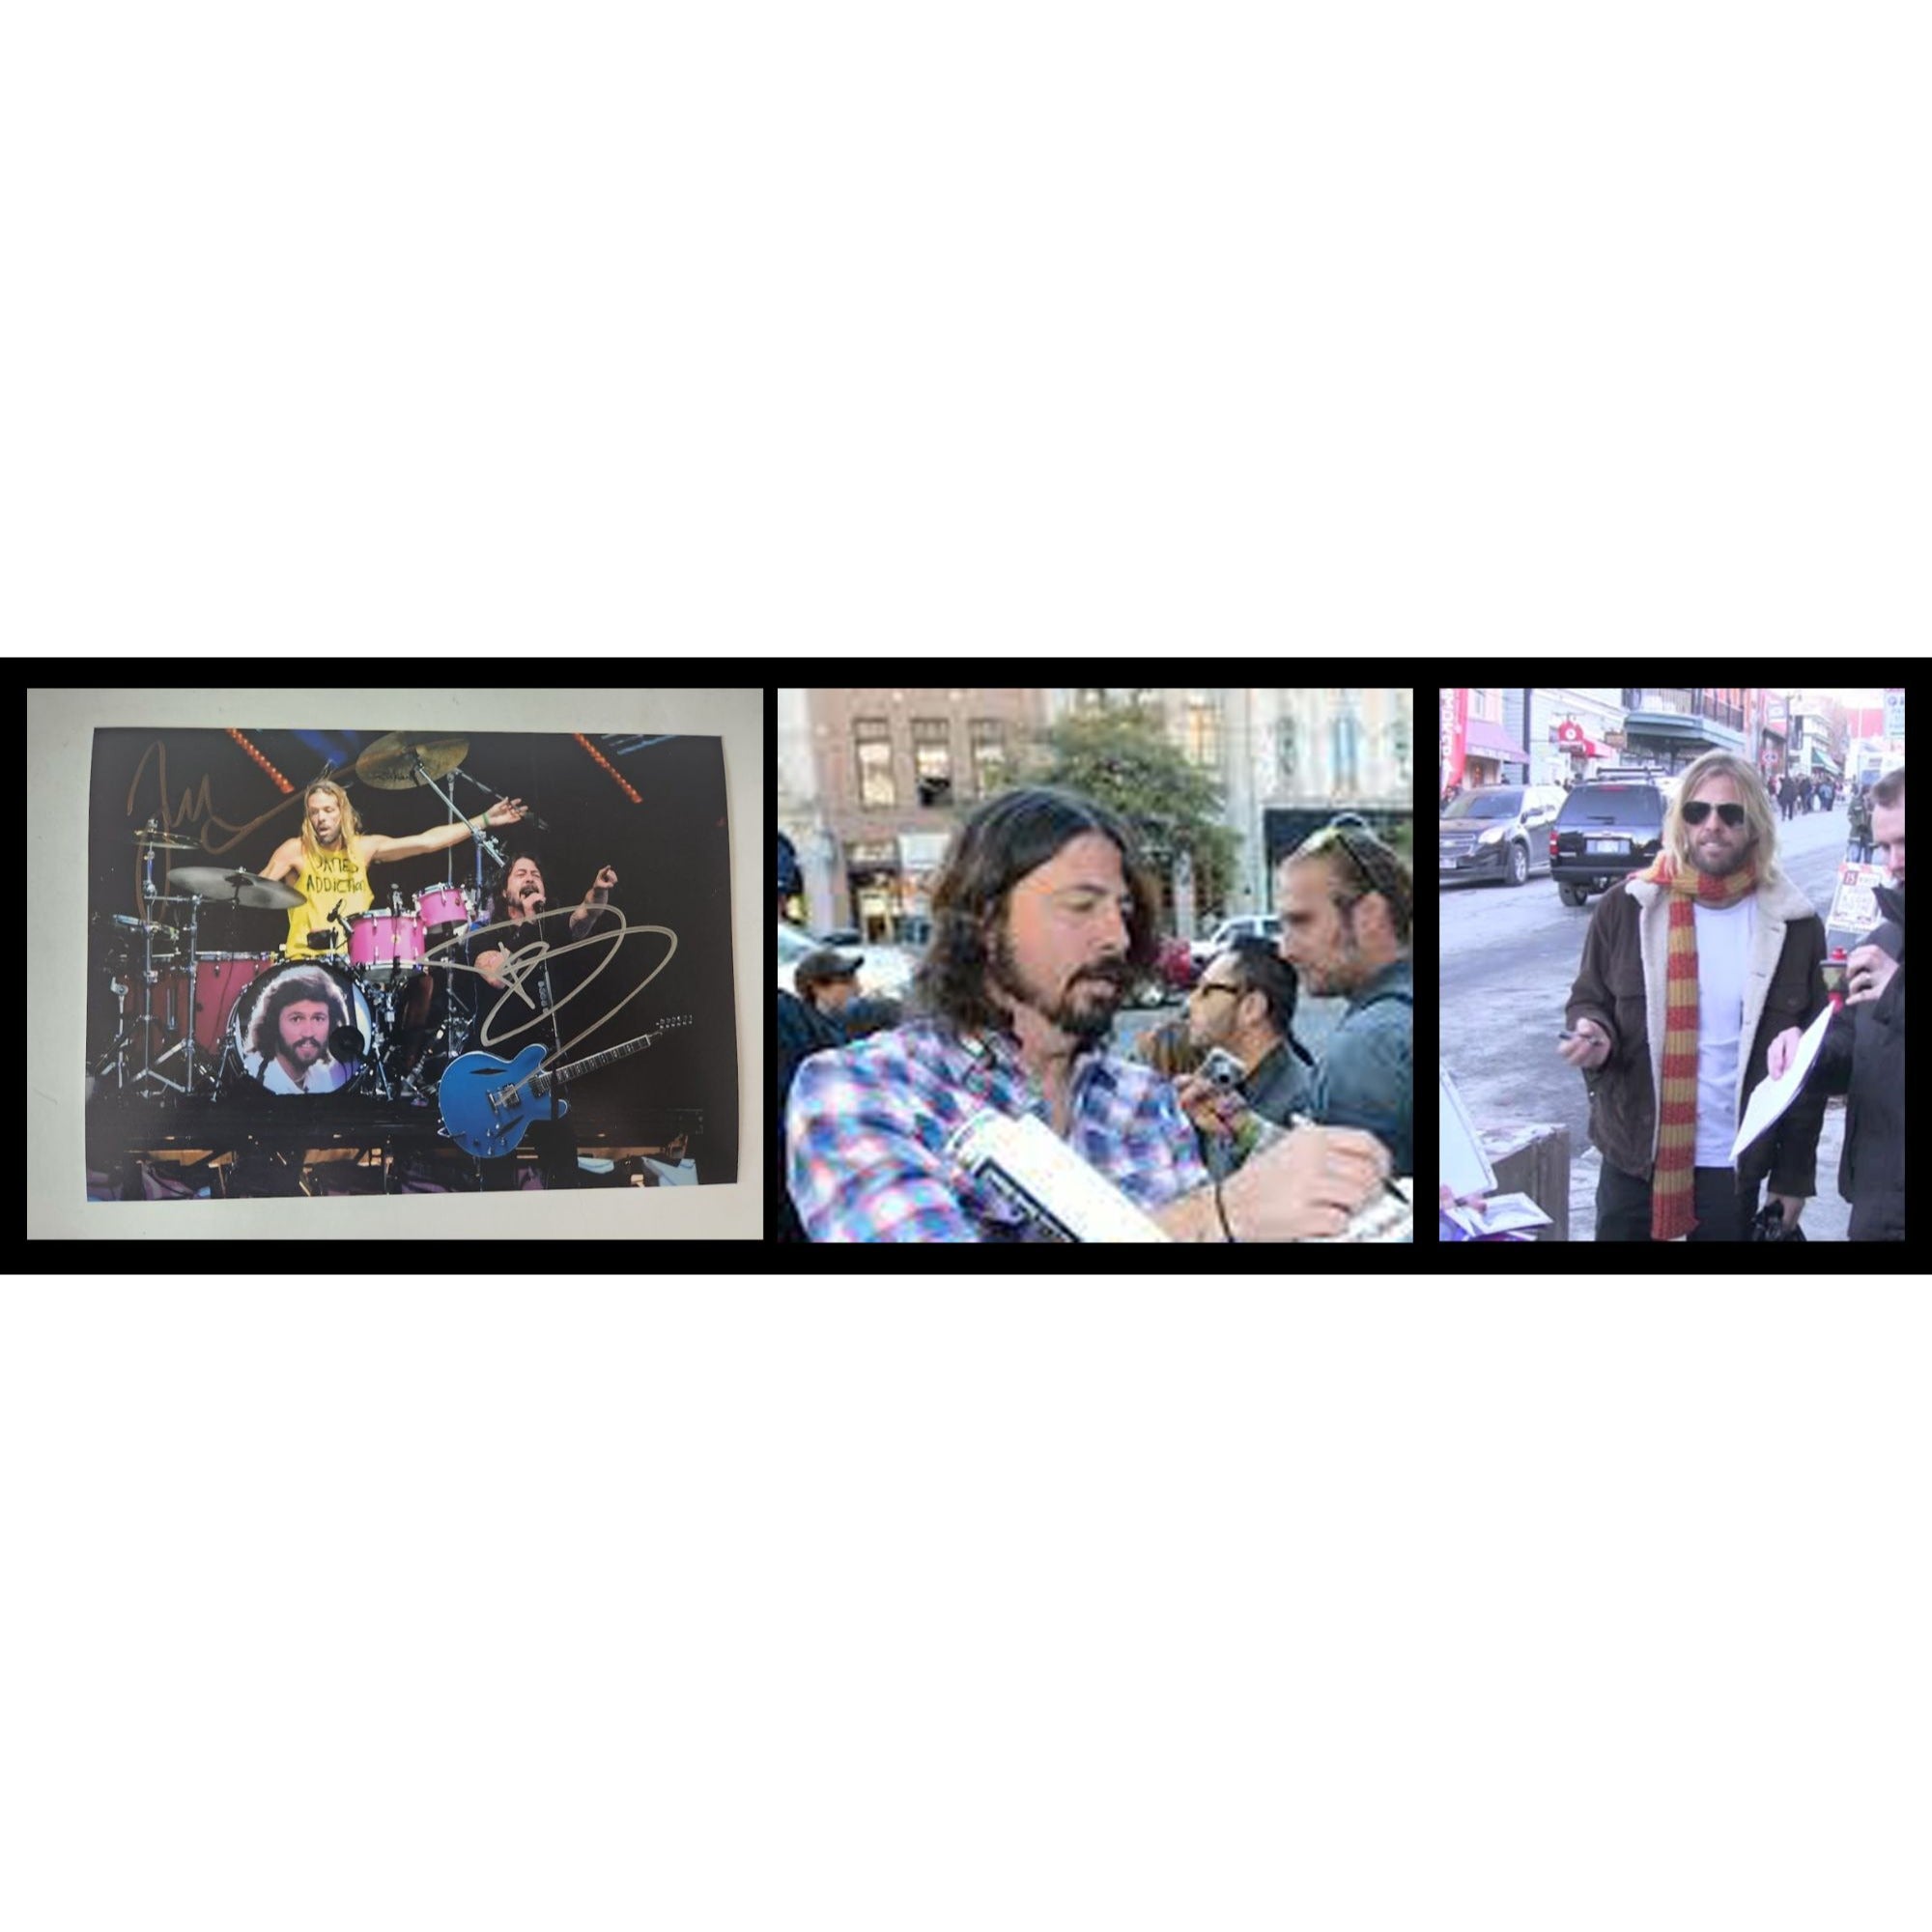 David Grohl Taylor Hawkins 5x7 photo signed with proof